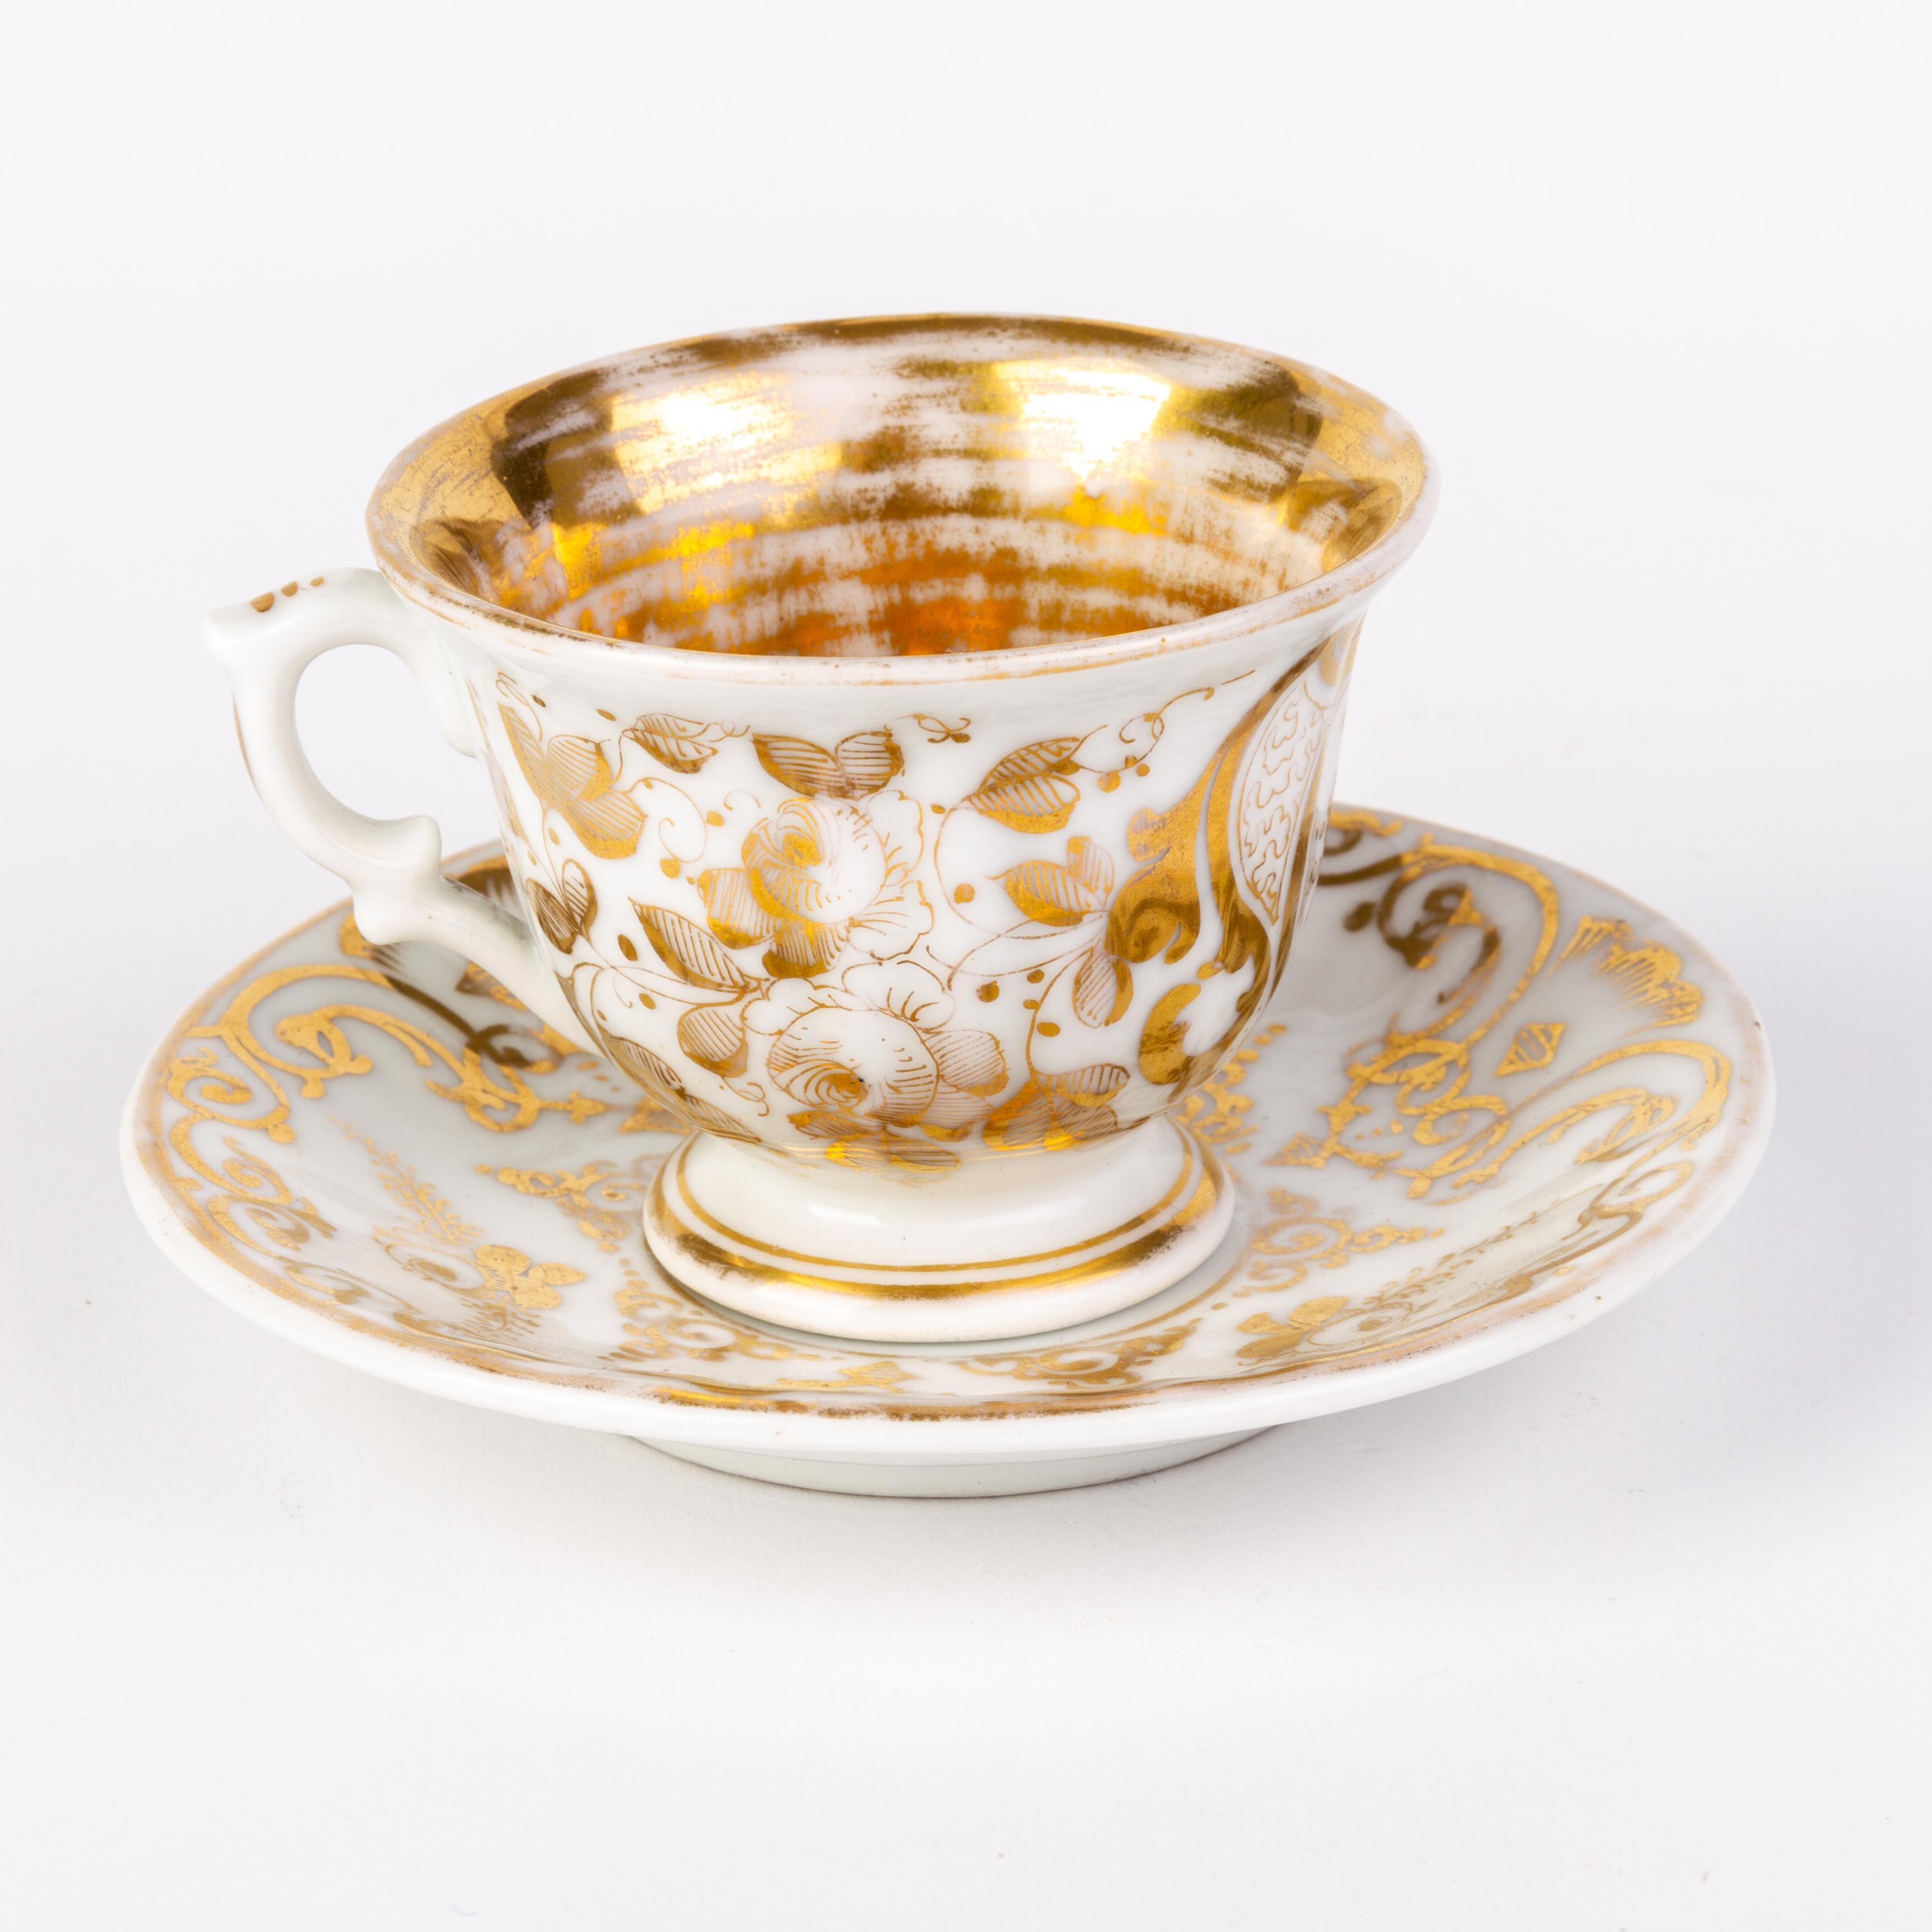 KPM Berlin German Fine Gilt Porcelain Tea Cup & Saucer ca. 1840
Good condition overall, as seen, some minor fading to gilt gold 
From a private collection.
Free international shipping.